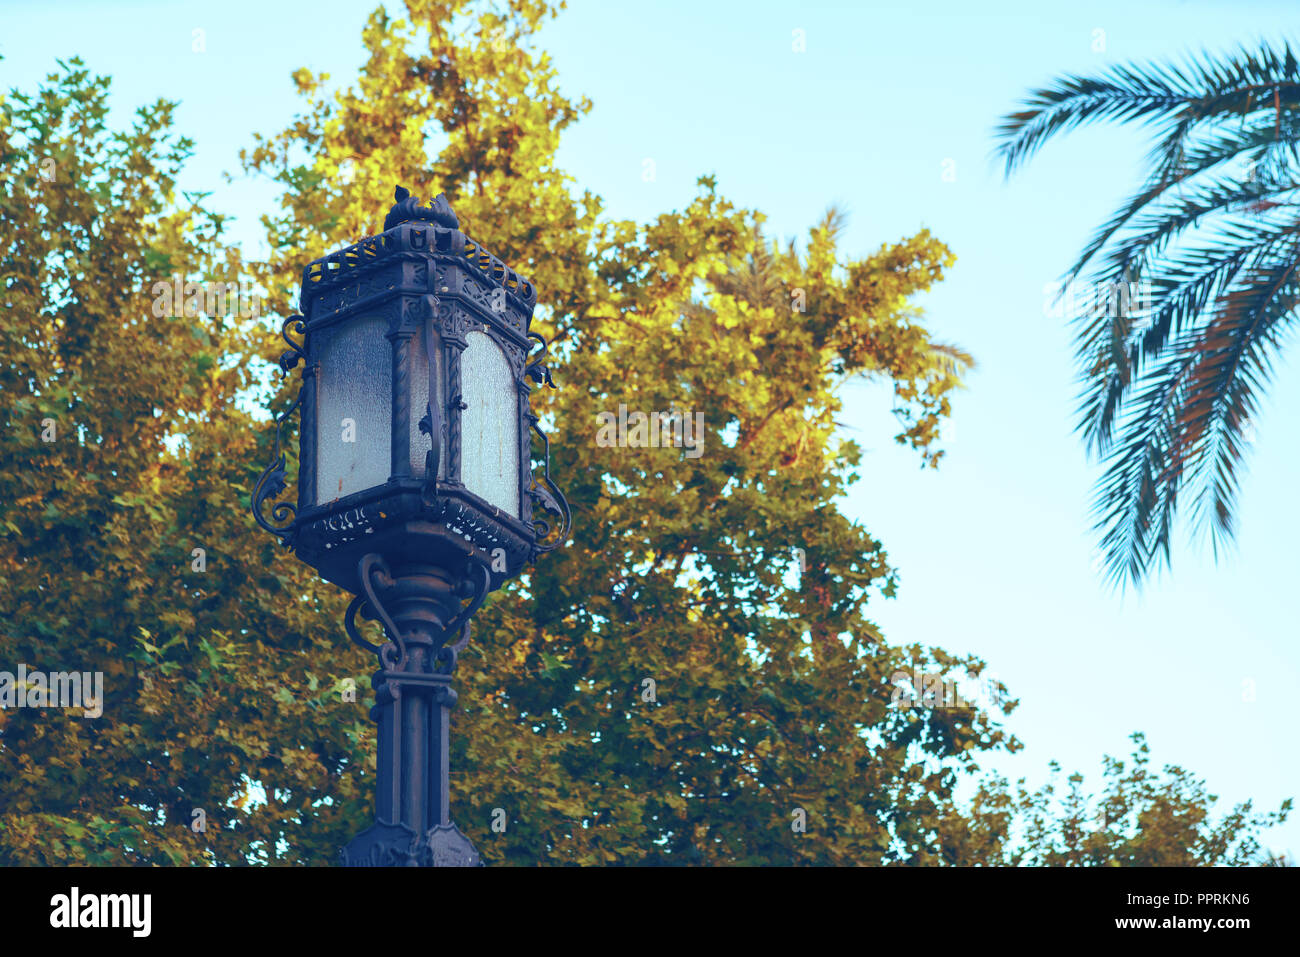 Detail of one beautiful street light in Seville Stock Photo